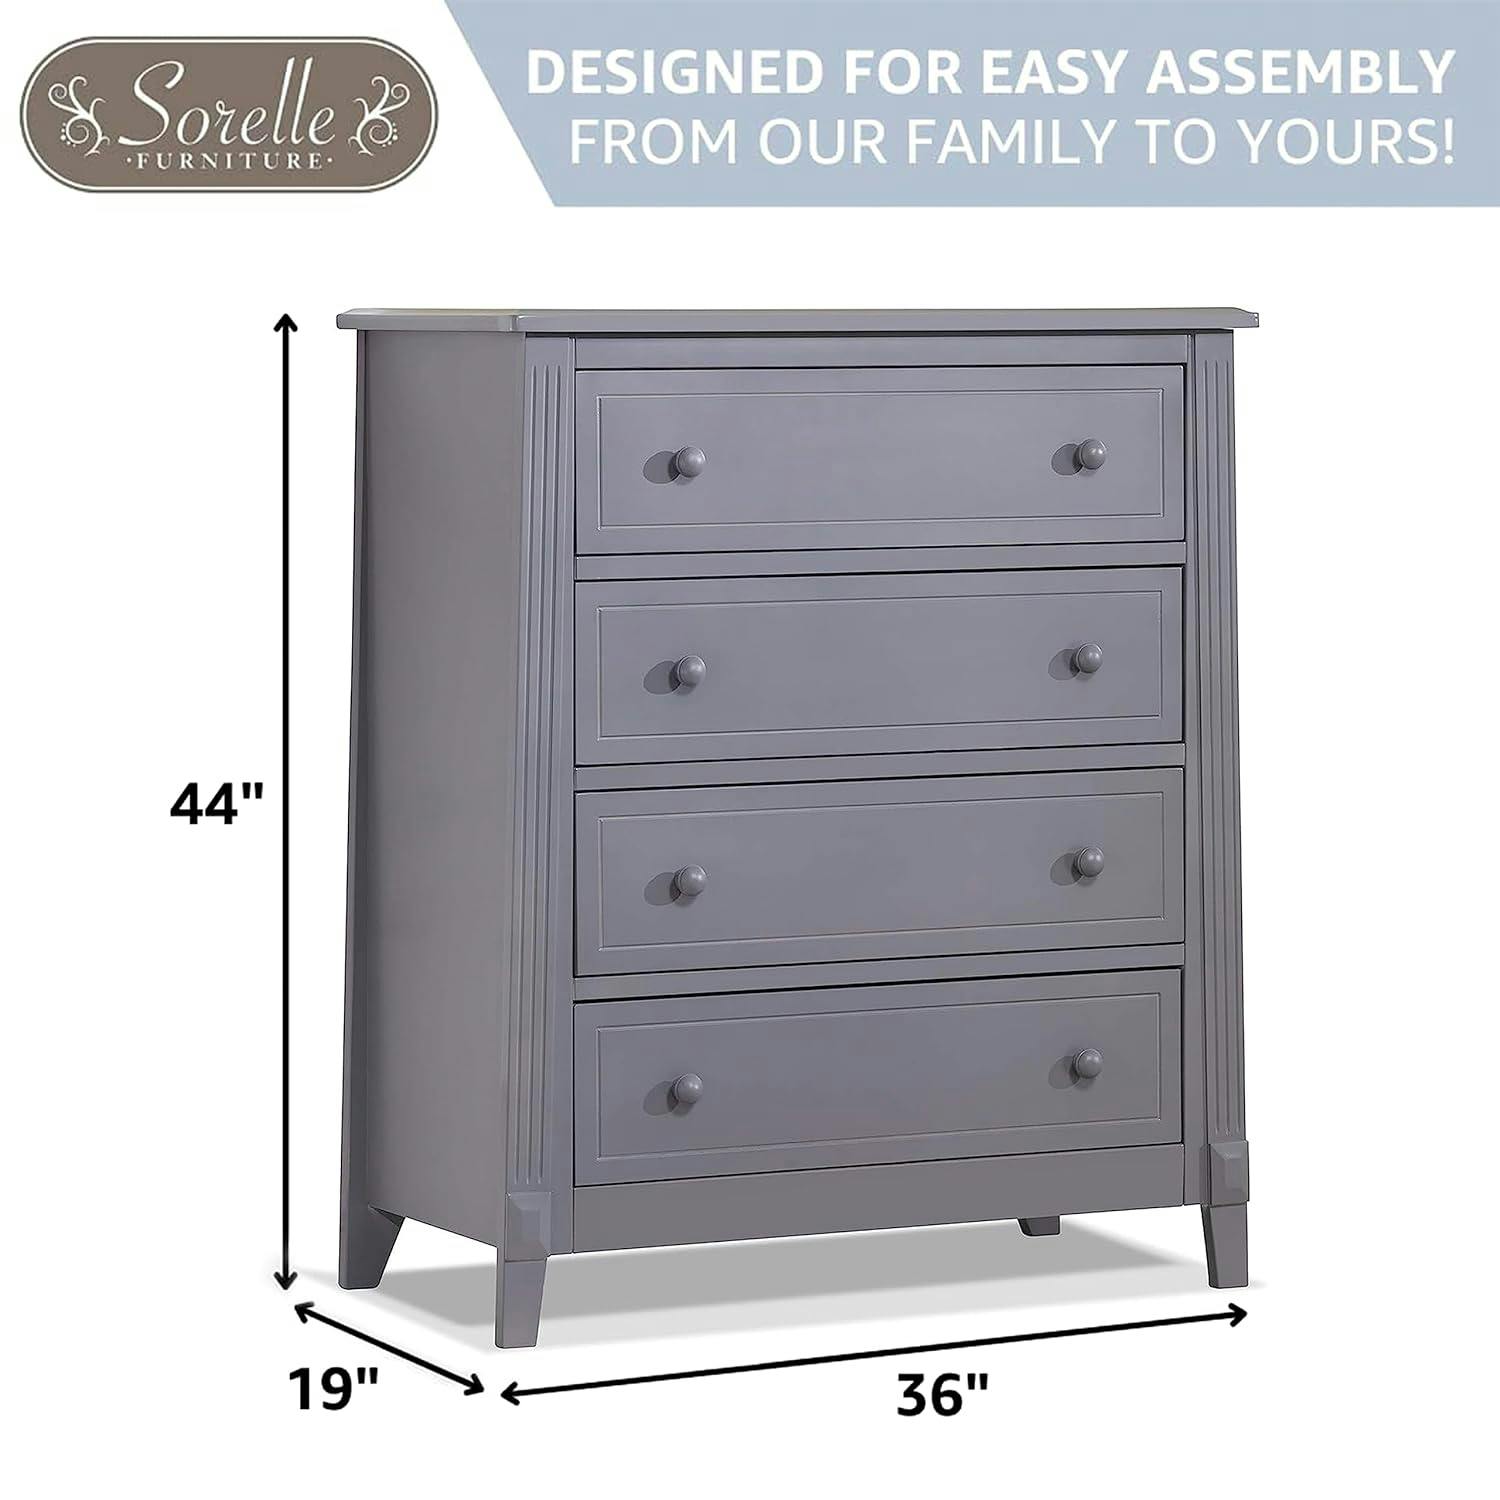 Classic Gray Double Nursery Dresser with Spacious Drawers